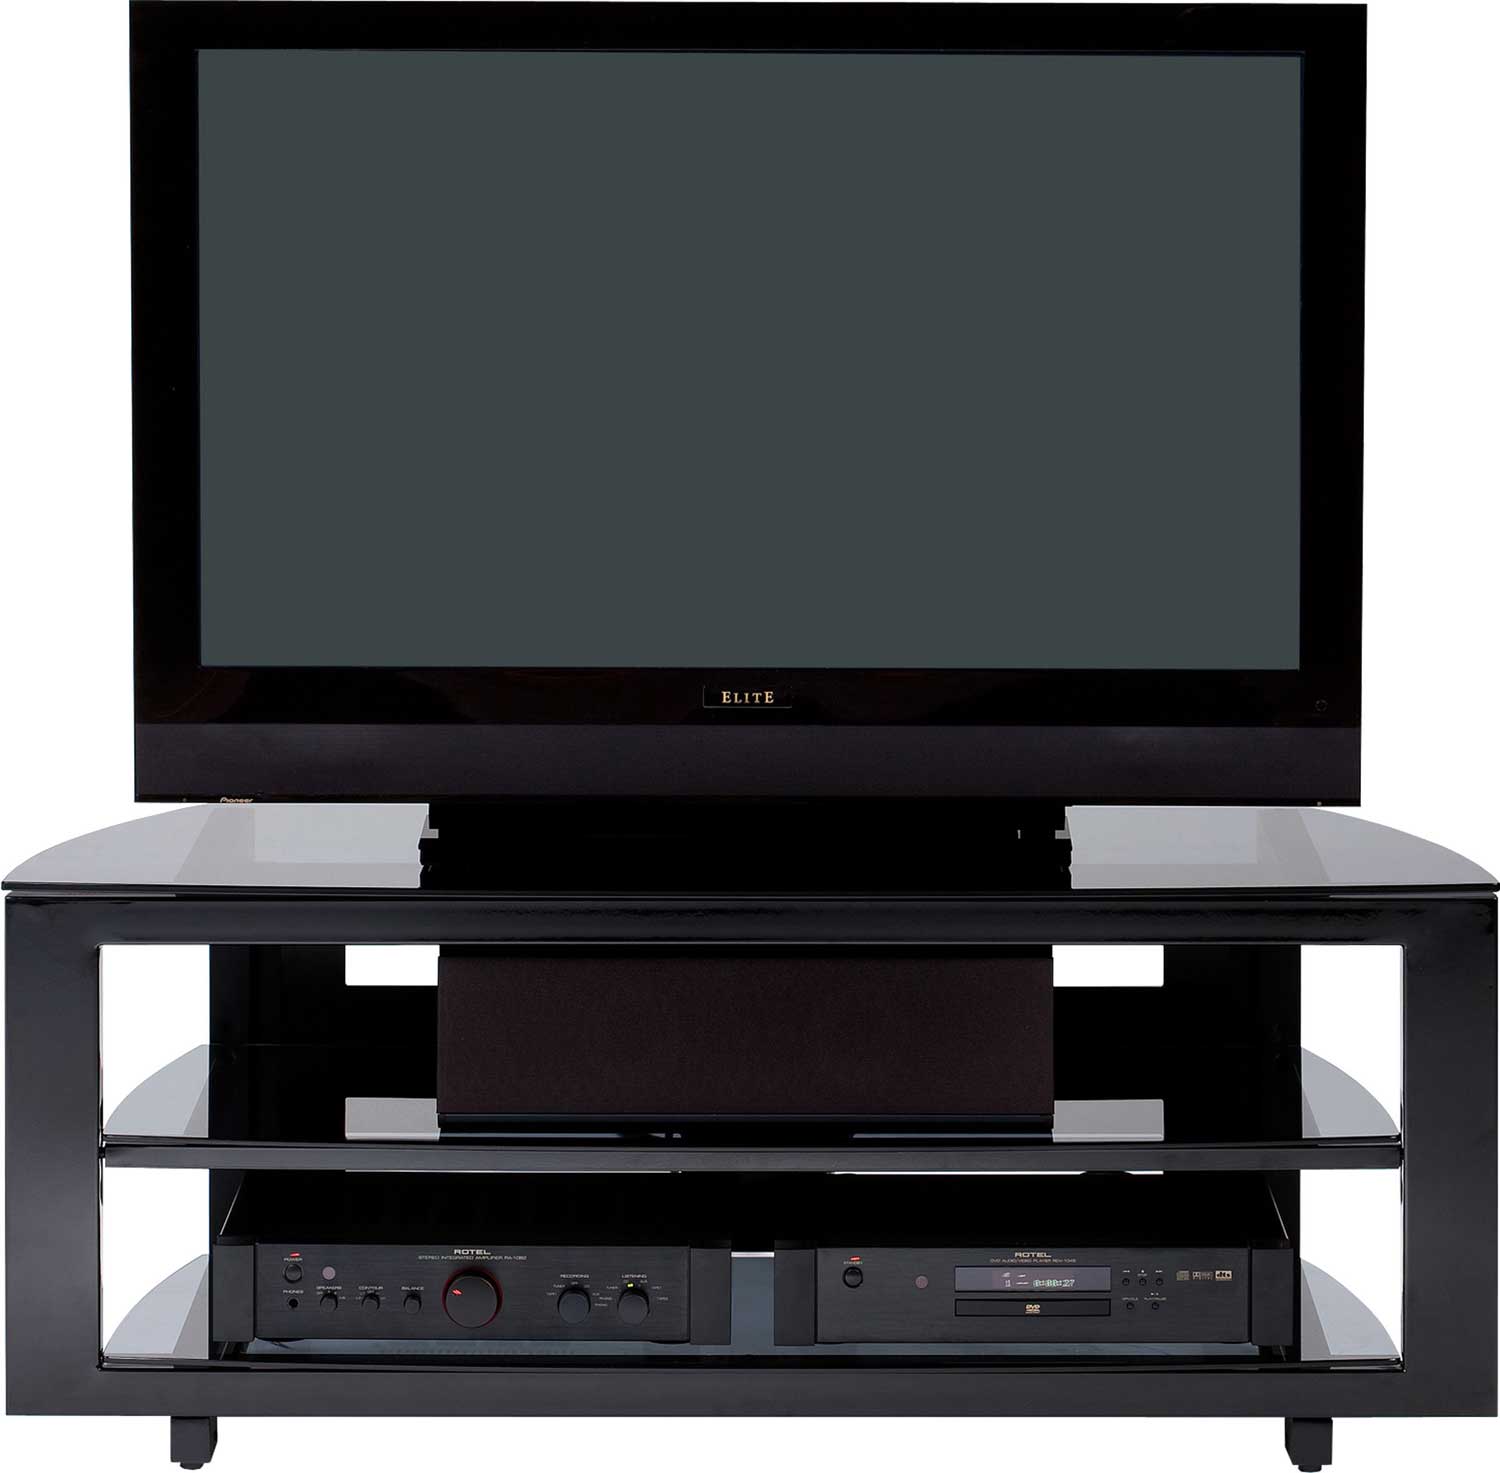 Deploy Max 9644 Black LED and LCD TV Stand